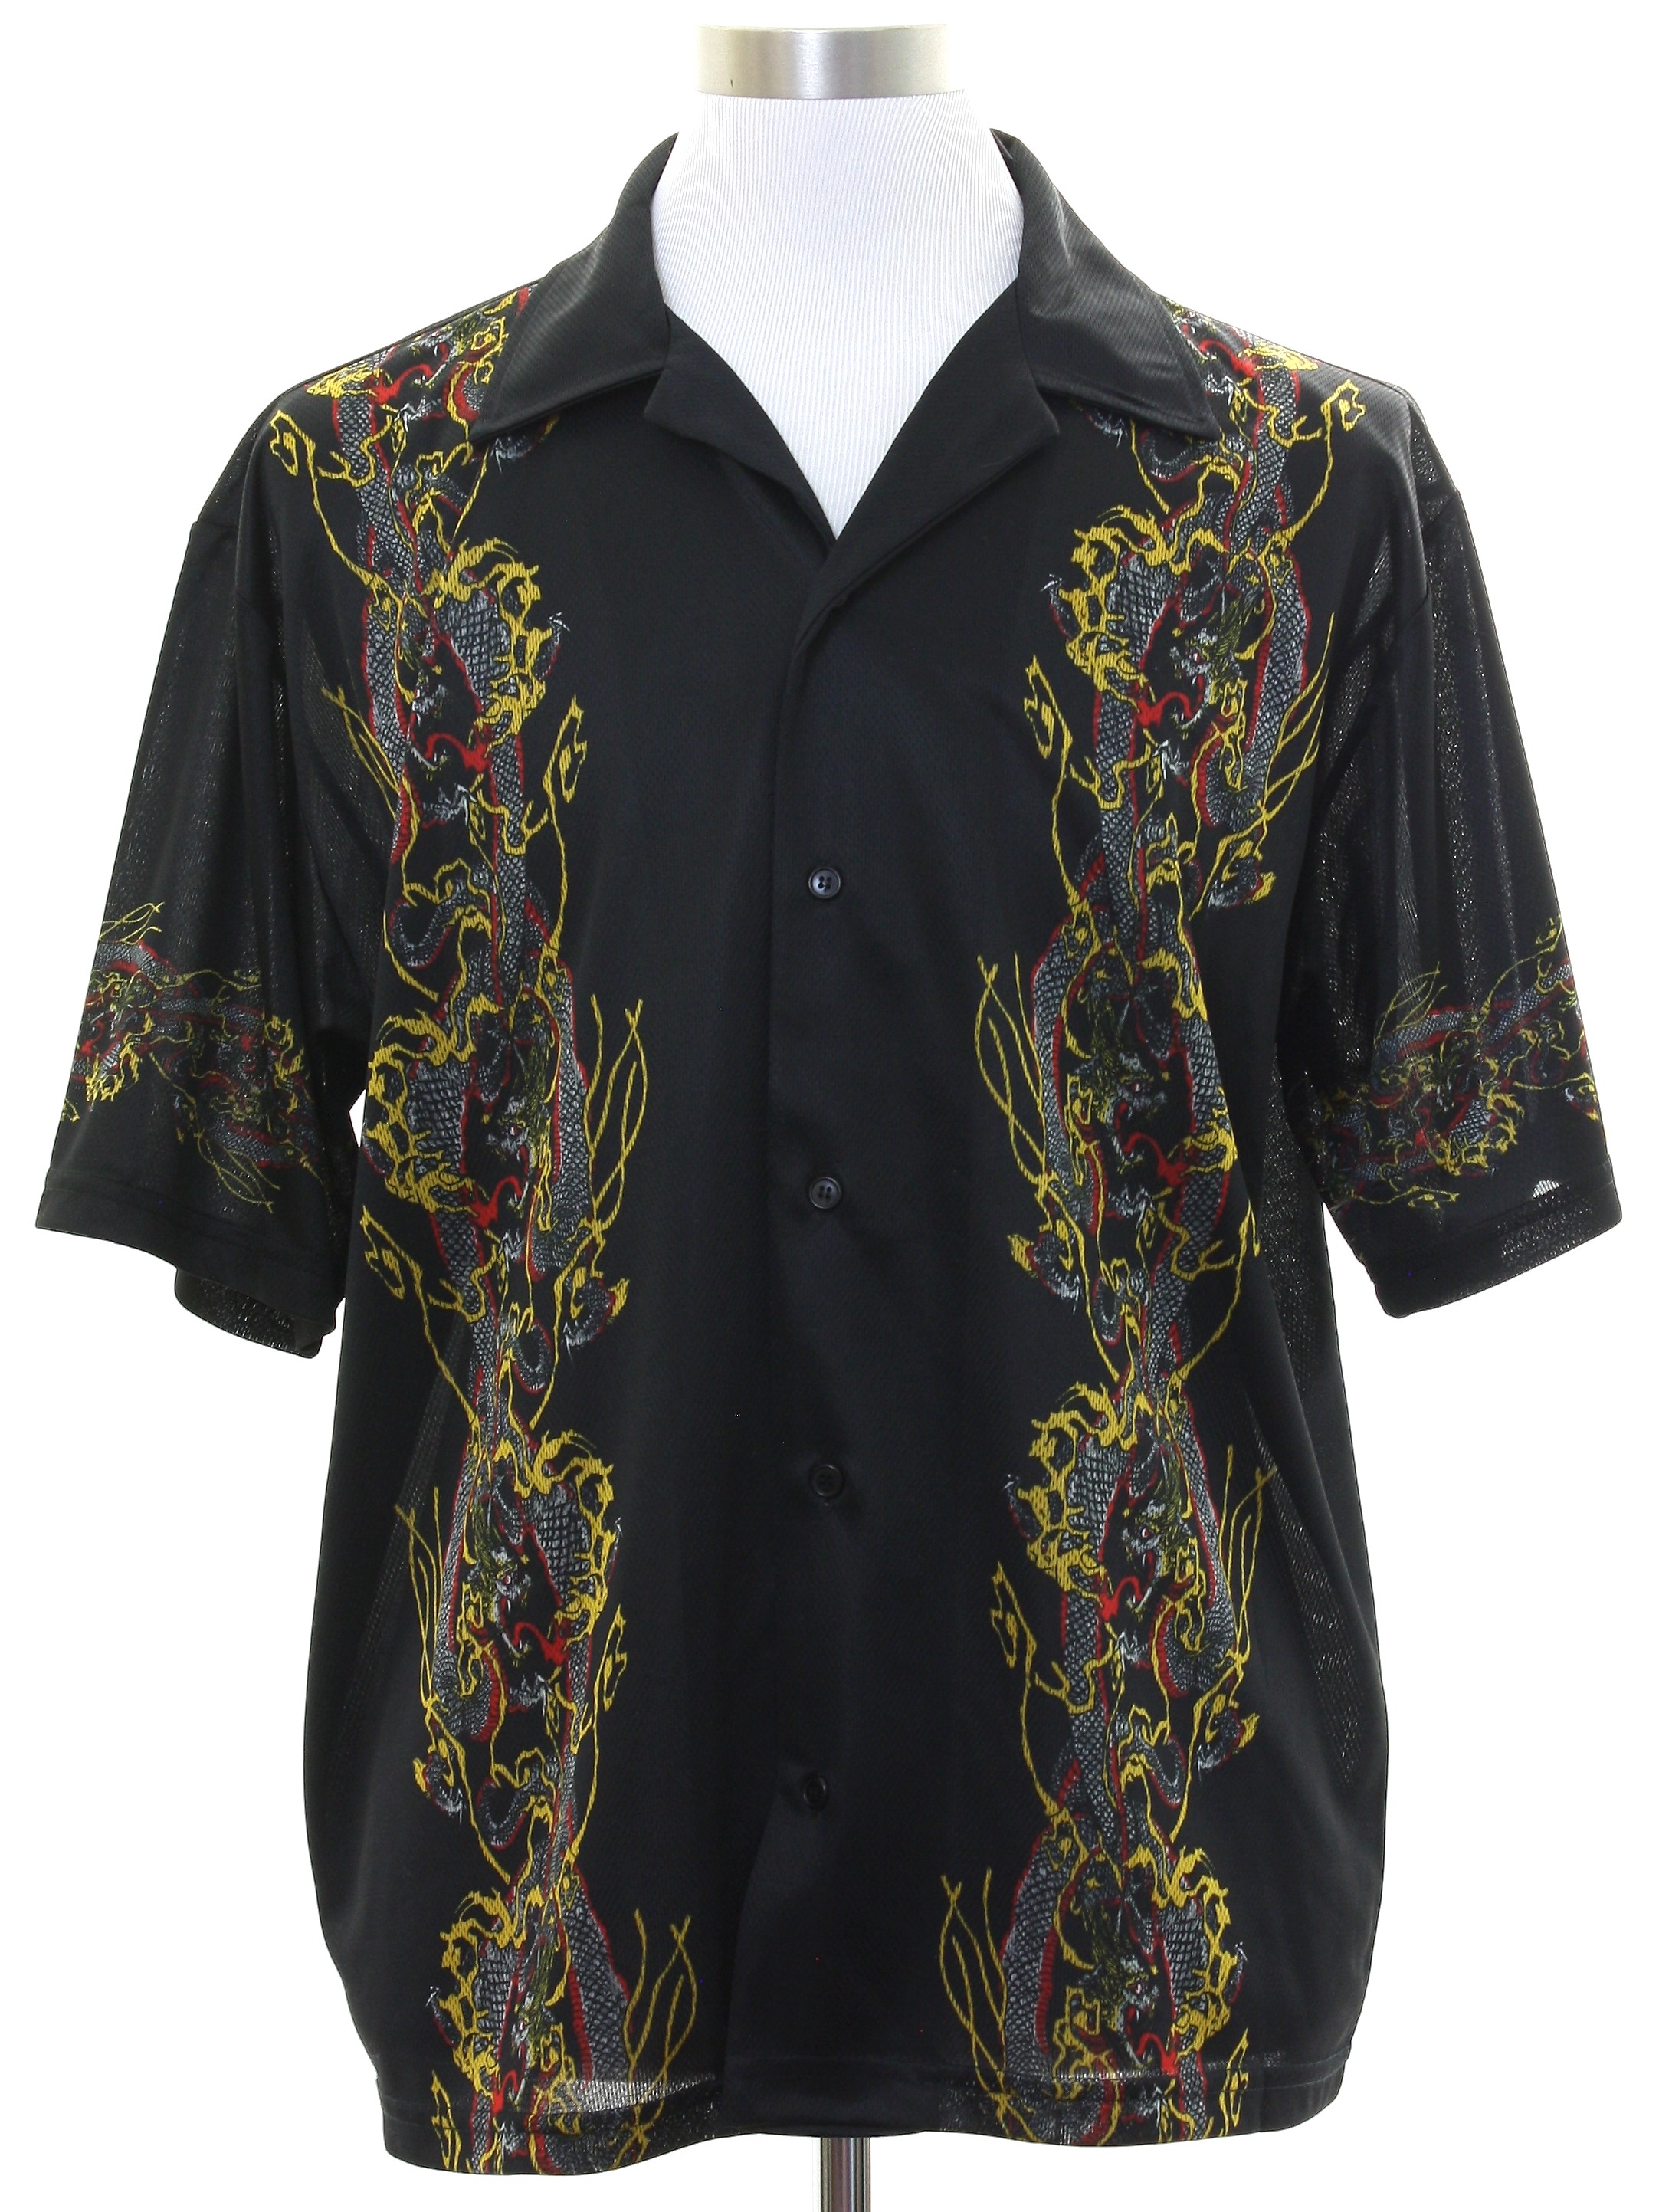 No Boundaries 90's Vintage Shirt: 90s -No Boundaries- Mens black background  polyester short sleeve button up front club/rave shirt with dragon print on  front and sleeves in shades of gold, red, and